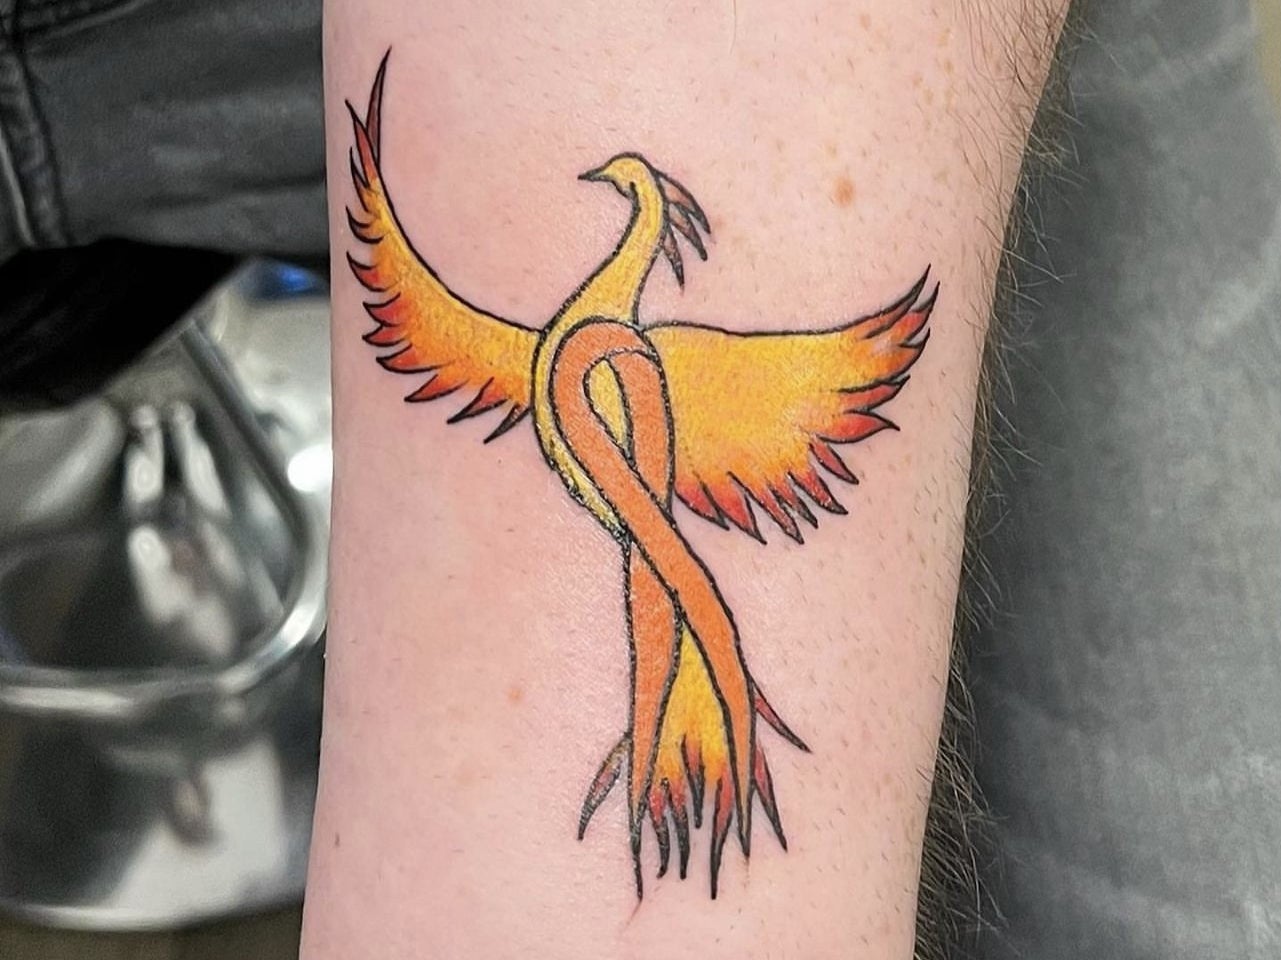 My tattoo honours my grandmother, who passed away from cancer